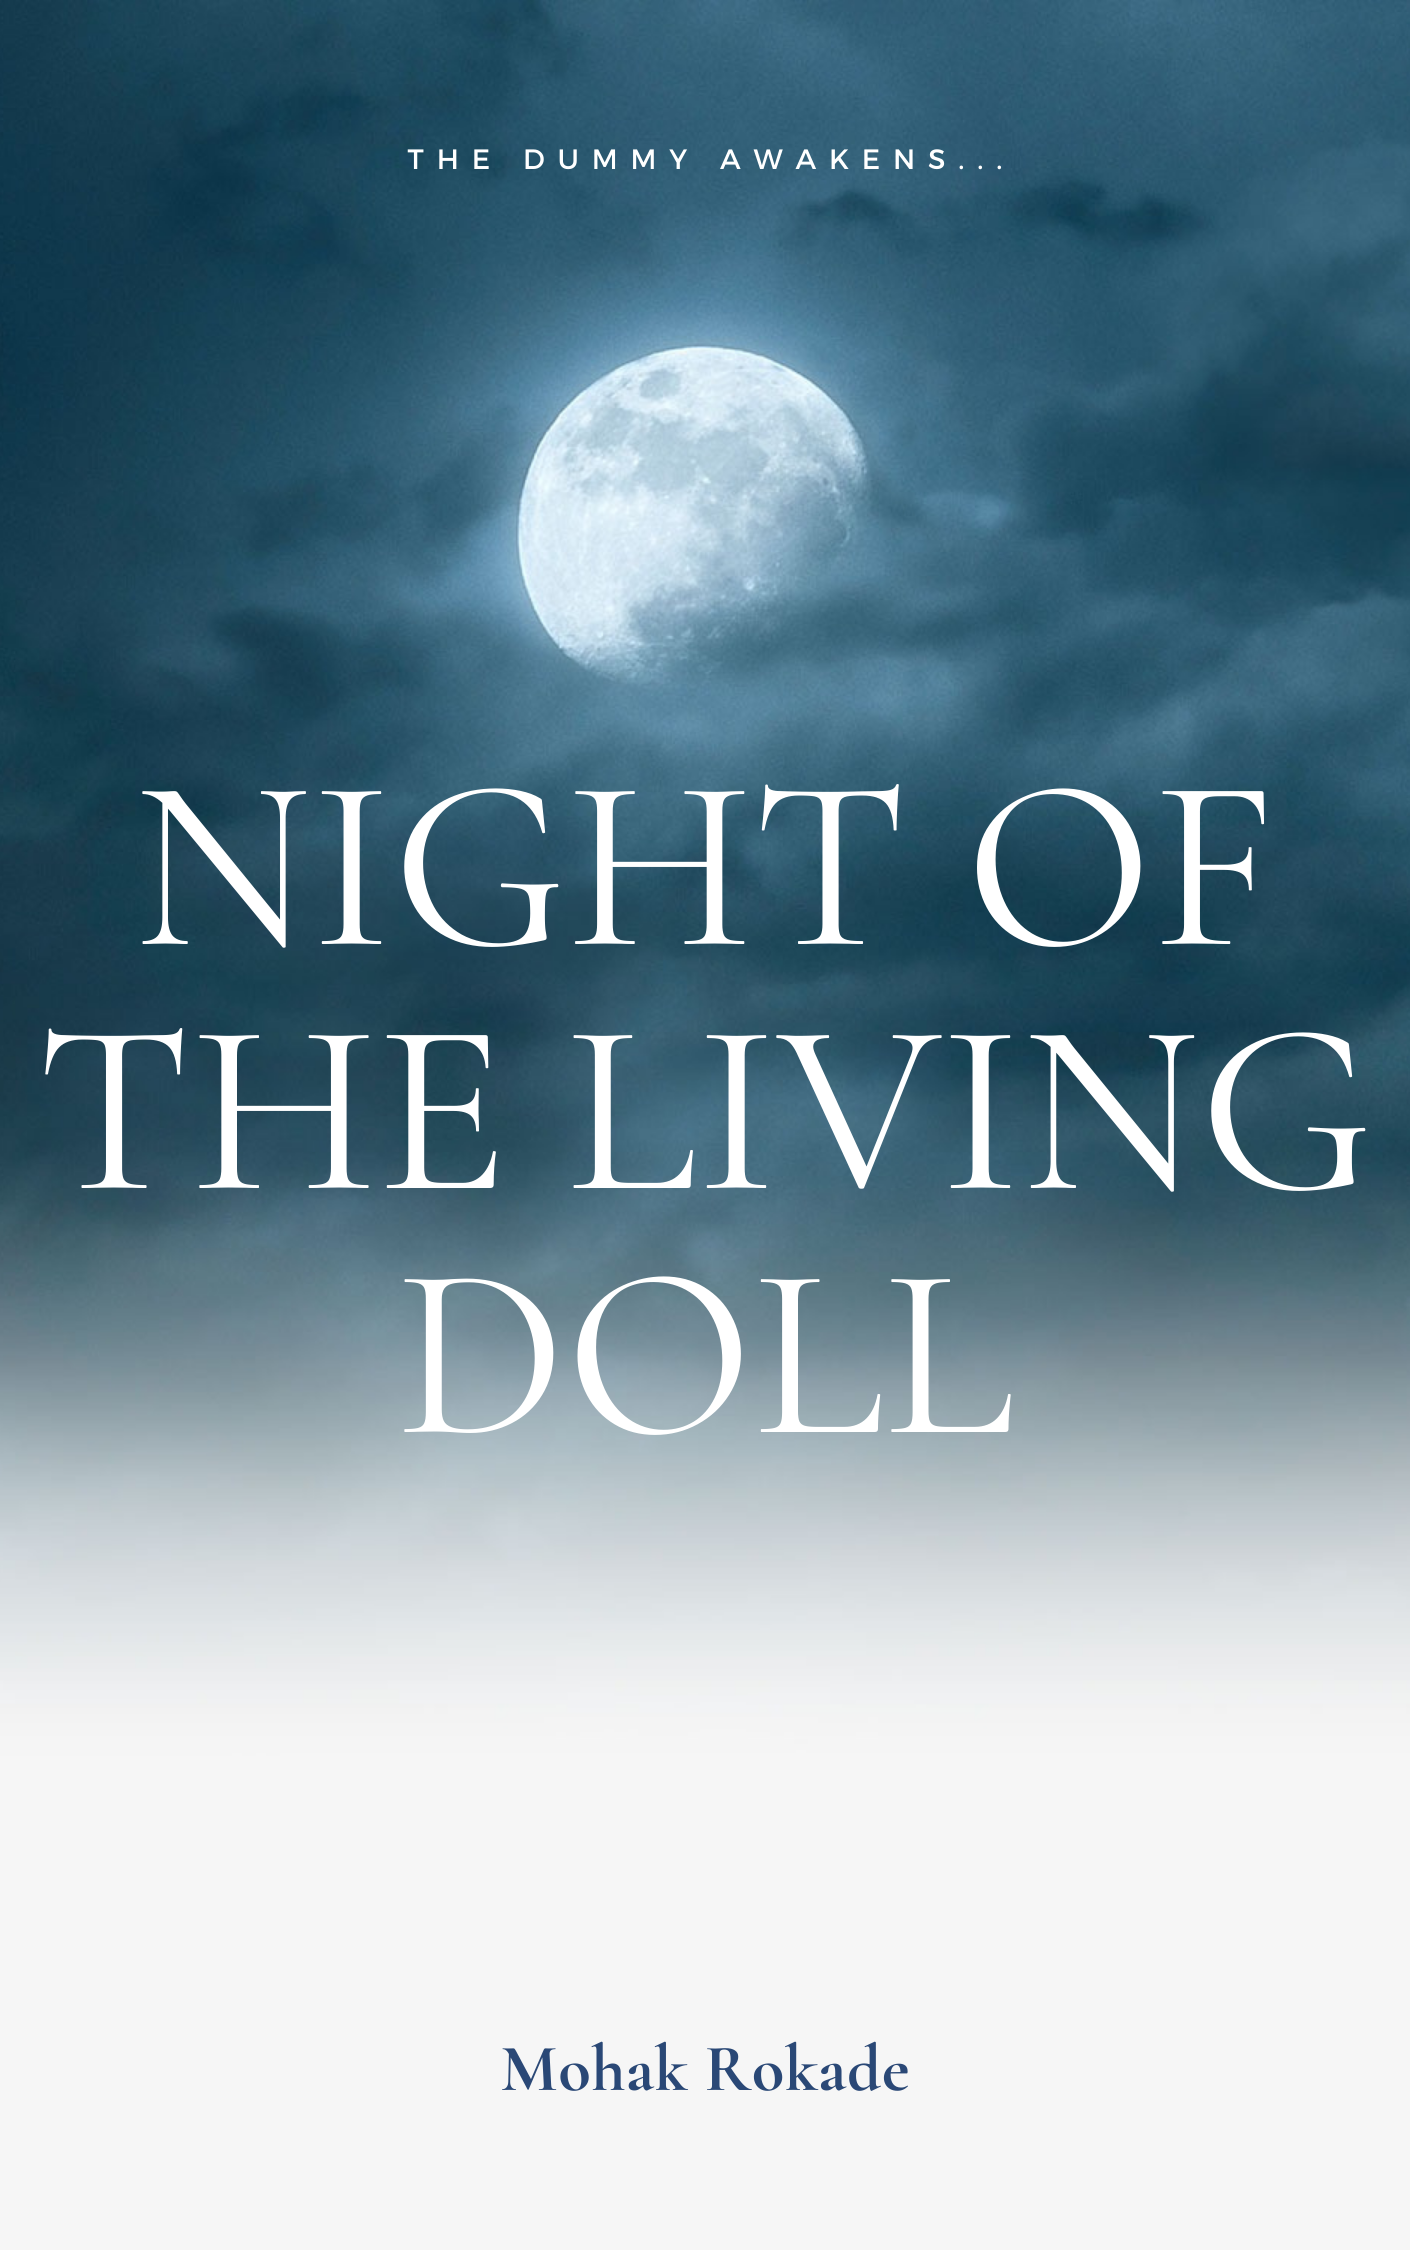 FREE: NIGHT OF THE LIVING DOLL by Mohak Rokade